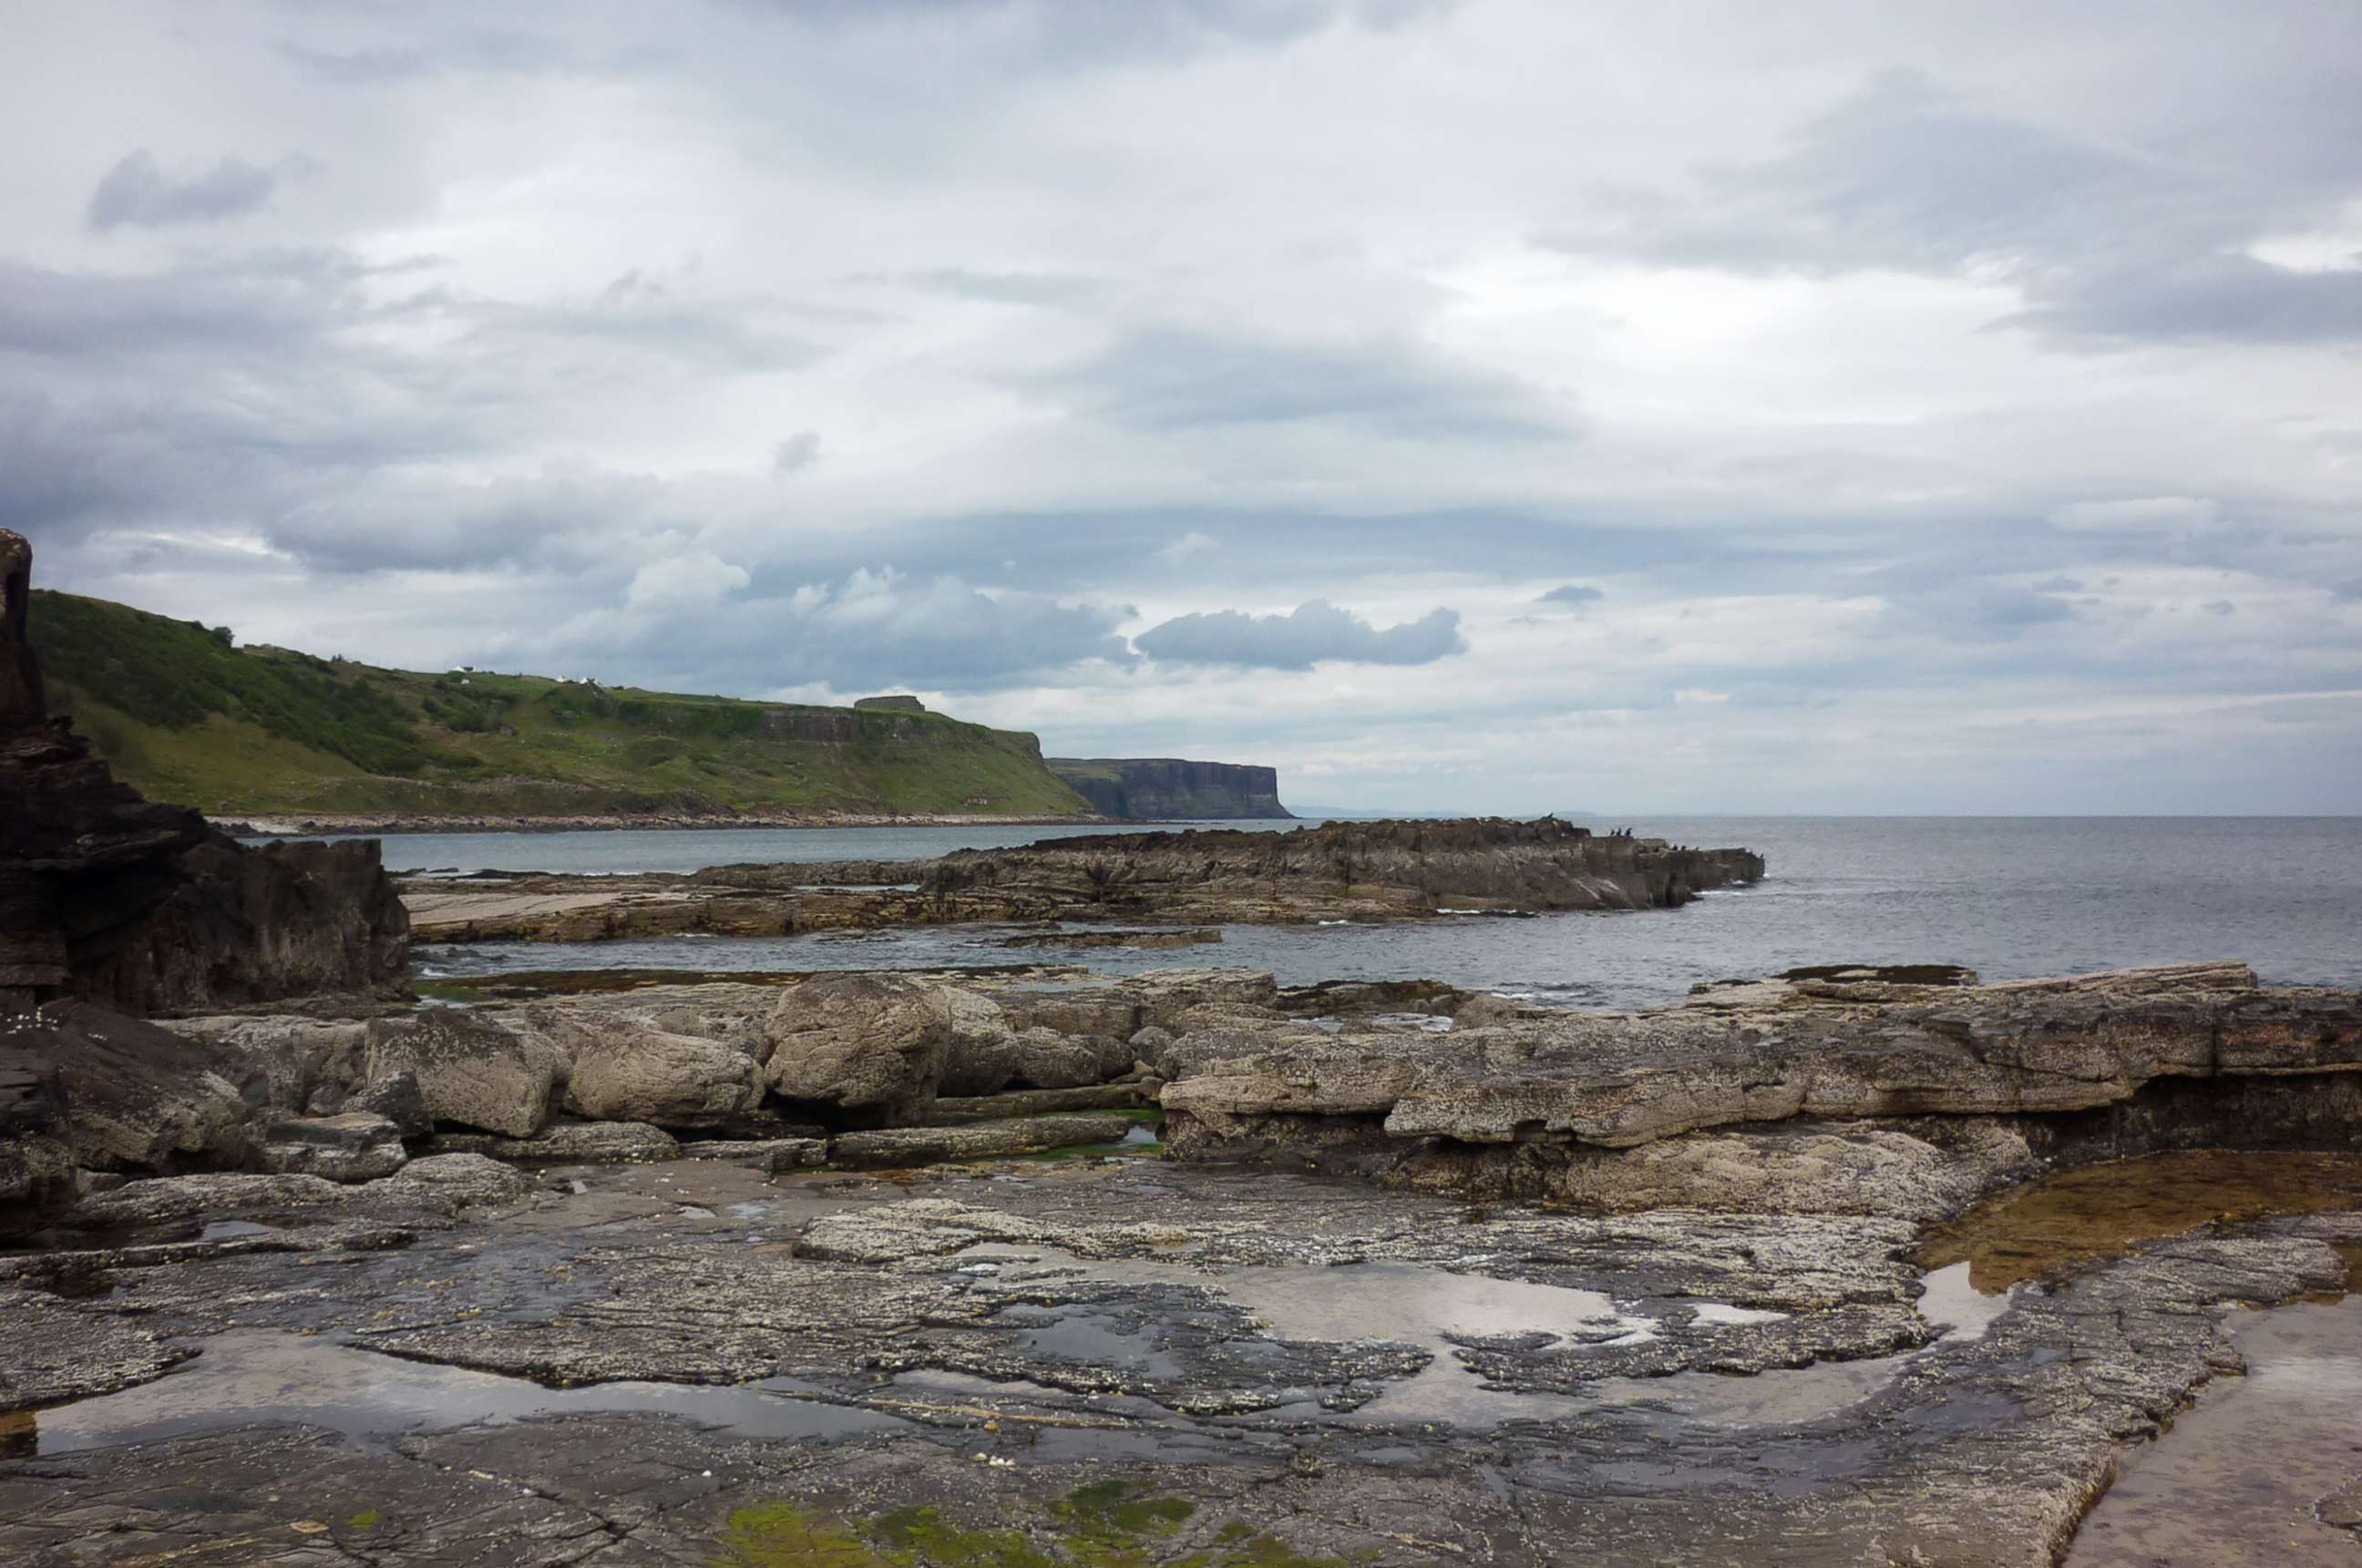 PHOTO: The tracksite looking towards Valtos and Kilt Rock Falls, along the coastline of the Isle of Skye in Scotland where numerous dinosaur footprints have been identified.